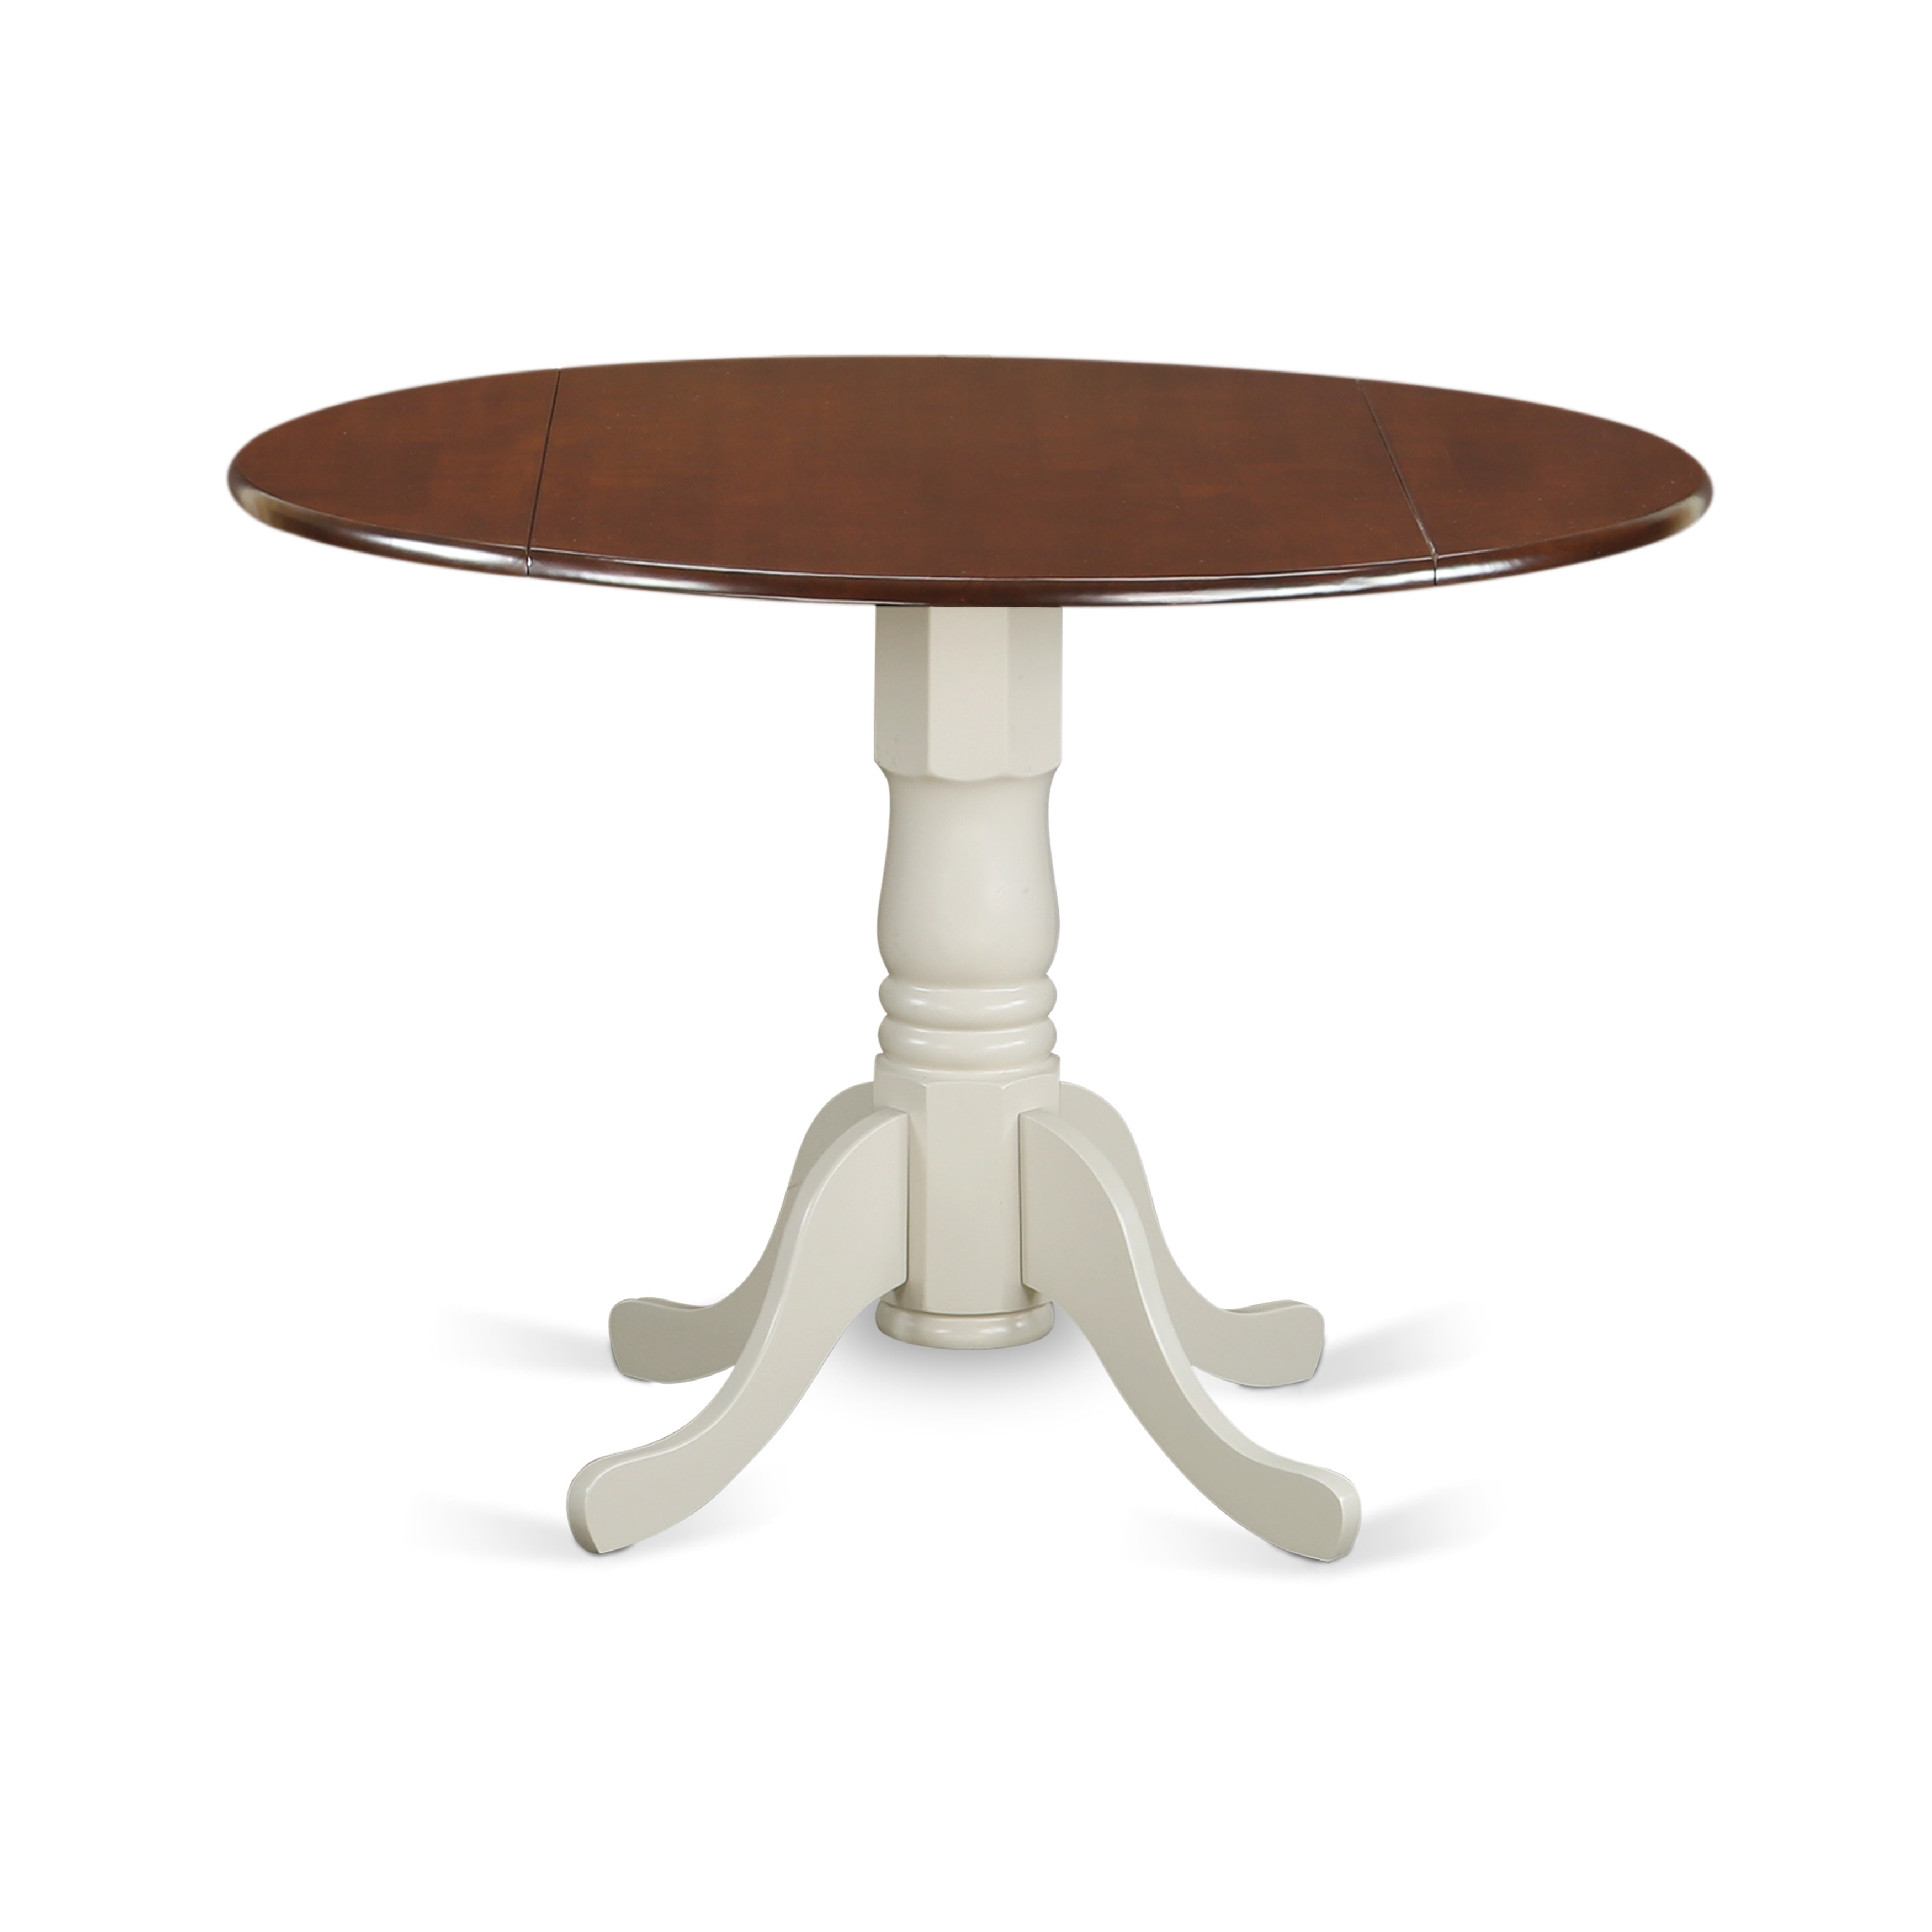 Shop Dlt Olw Tp Dublin Round Table With Two 9 Drop Leaves In Oak